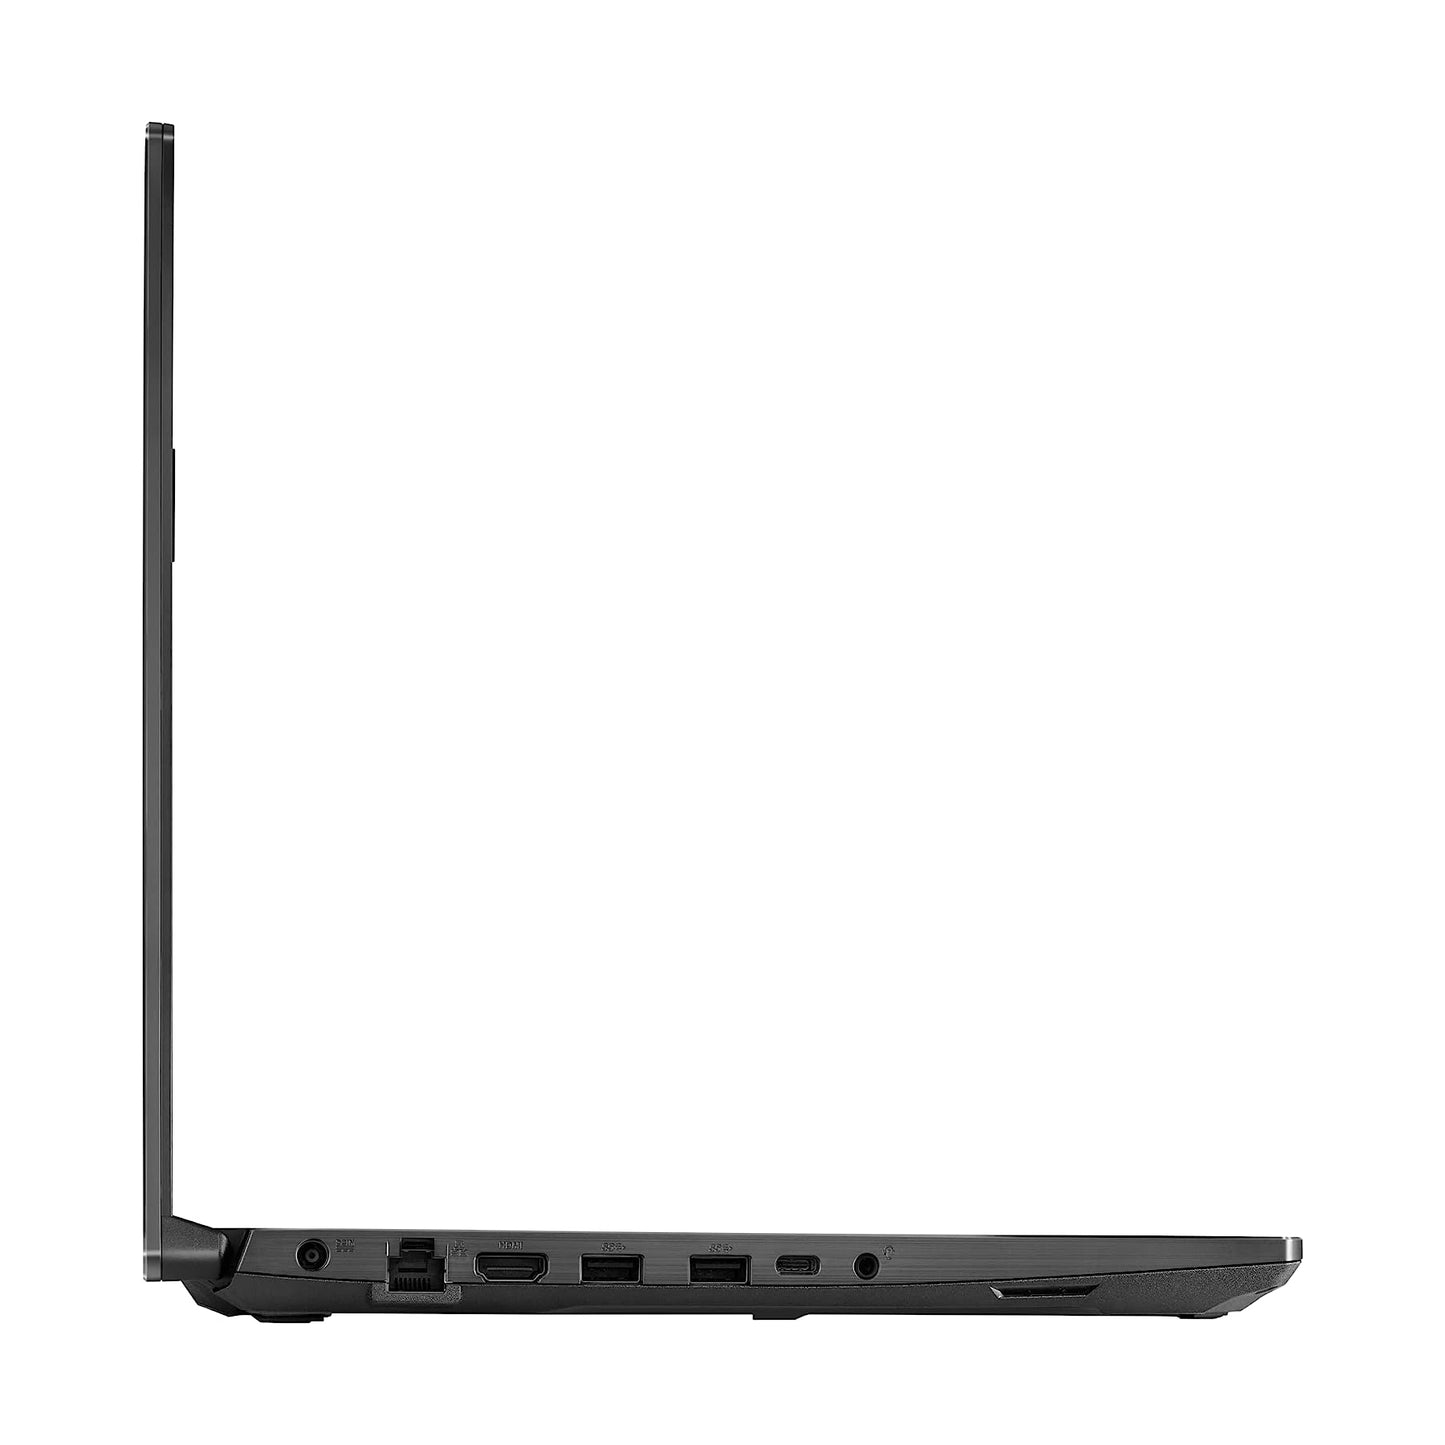 Asus Tuf F15 FX506HEB-IS73 Military Grade Core i7-11800h Rtx 3050 Ti 144Hz Gaming Laptop Offers (New OB)